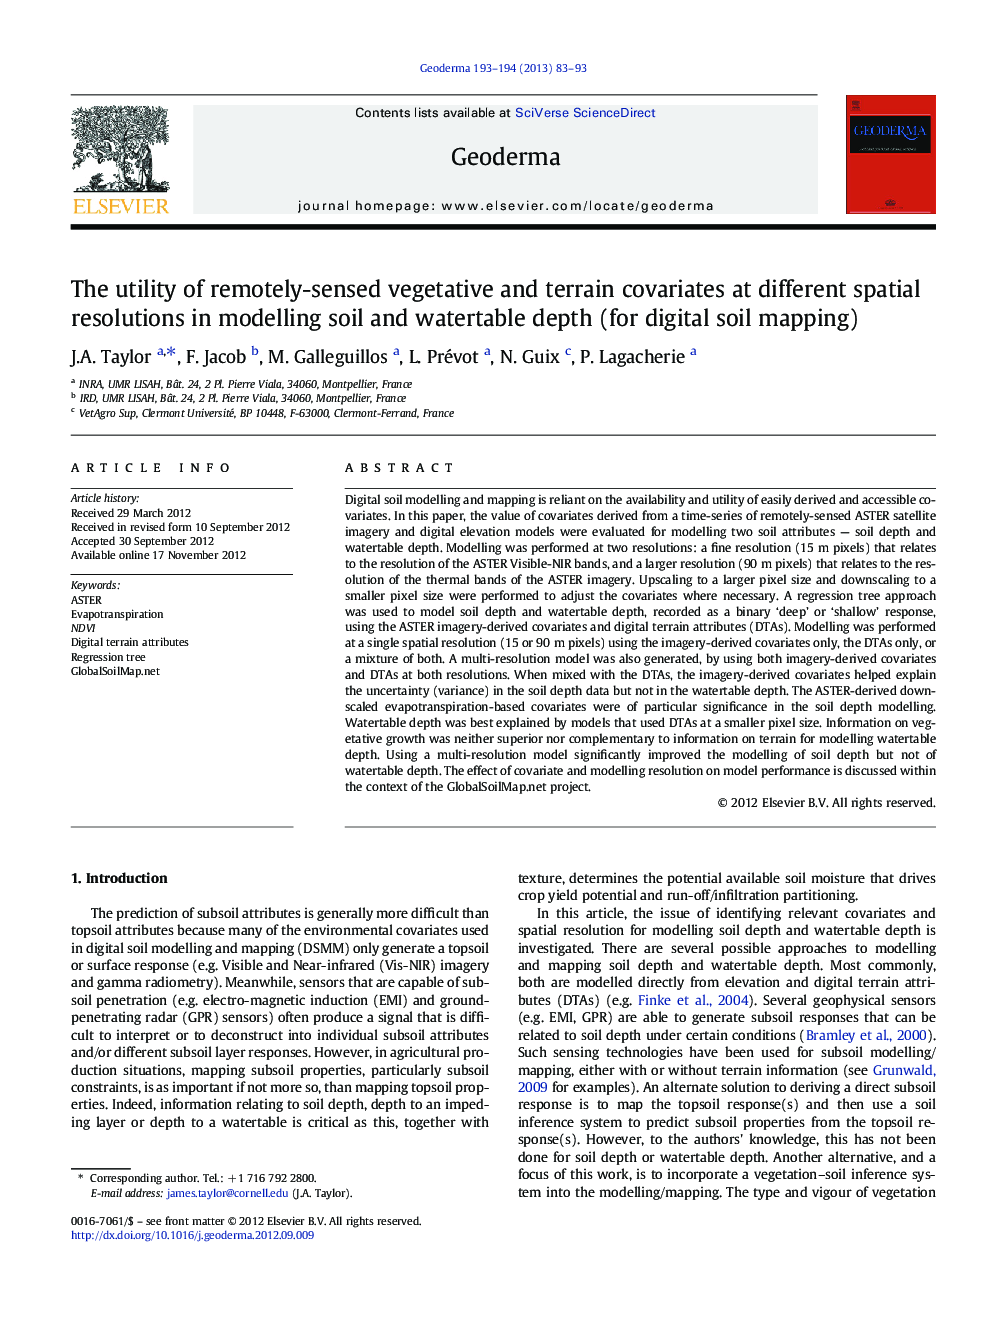 The utility of remotely-sensed vegetative and terrain covariates at different spatial resolutions in modelling soil and watertable depth (for digital soil mapping)